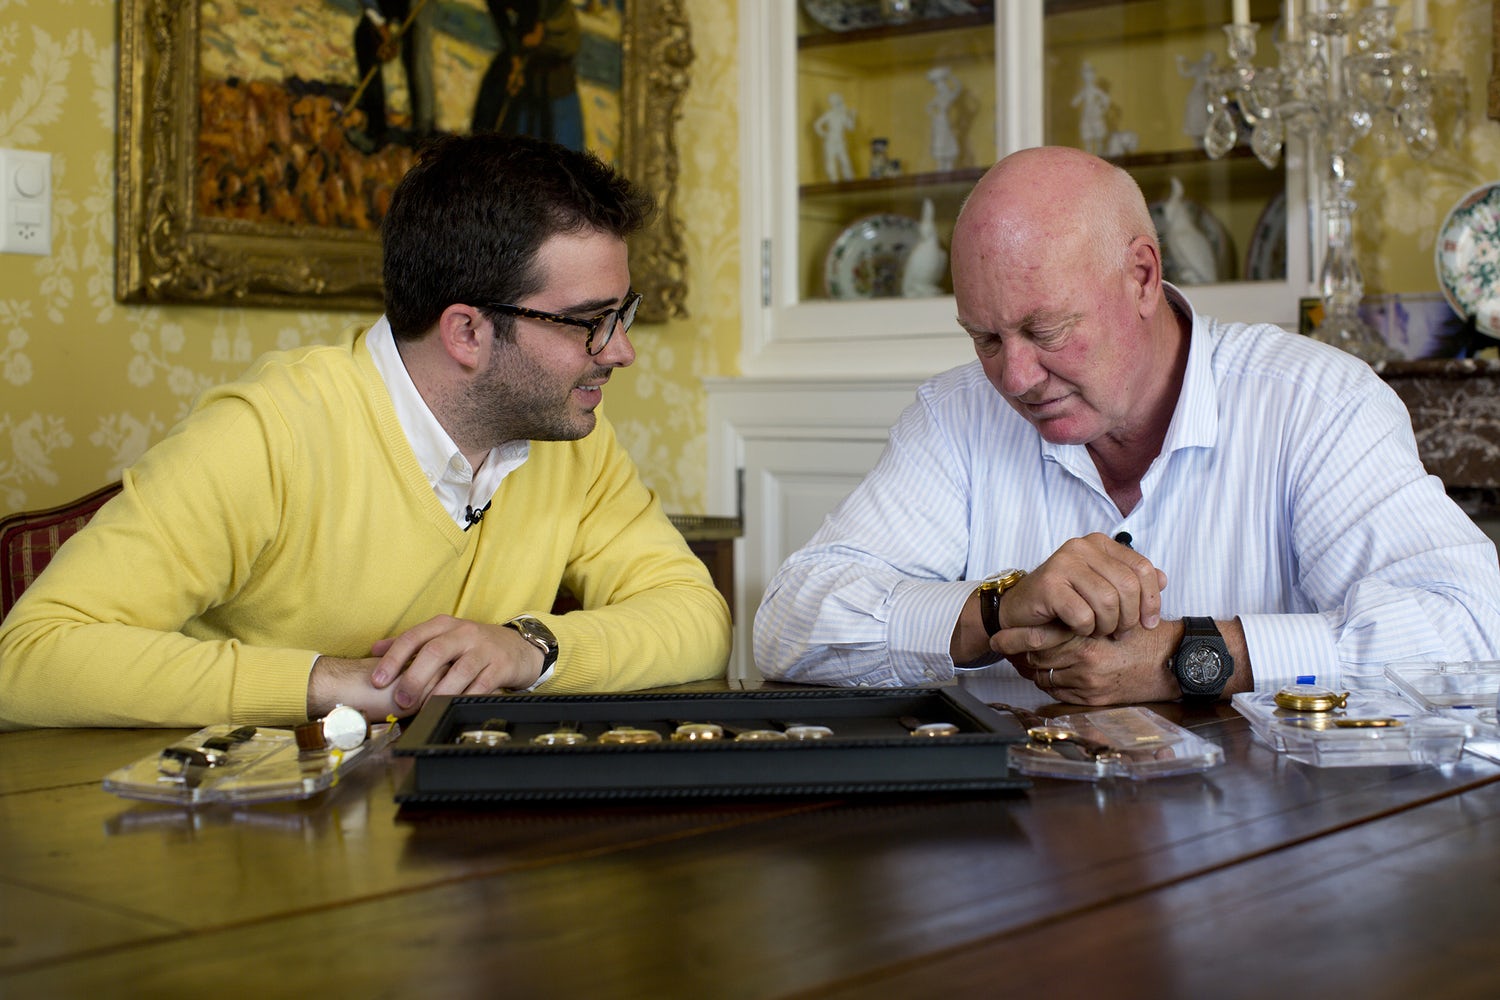 Jean-Claude Biver, The Godfather of Swiss Luxury Watchmaking